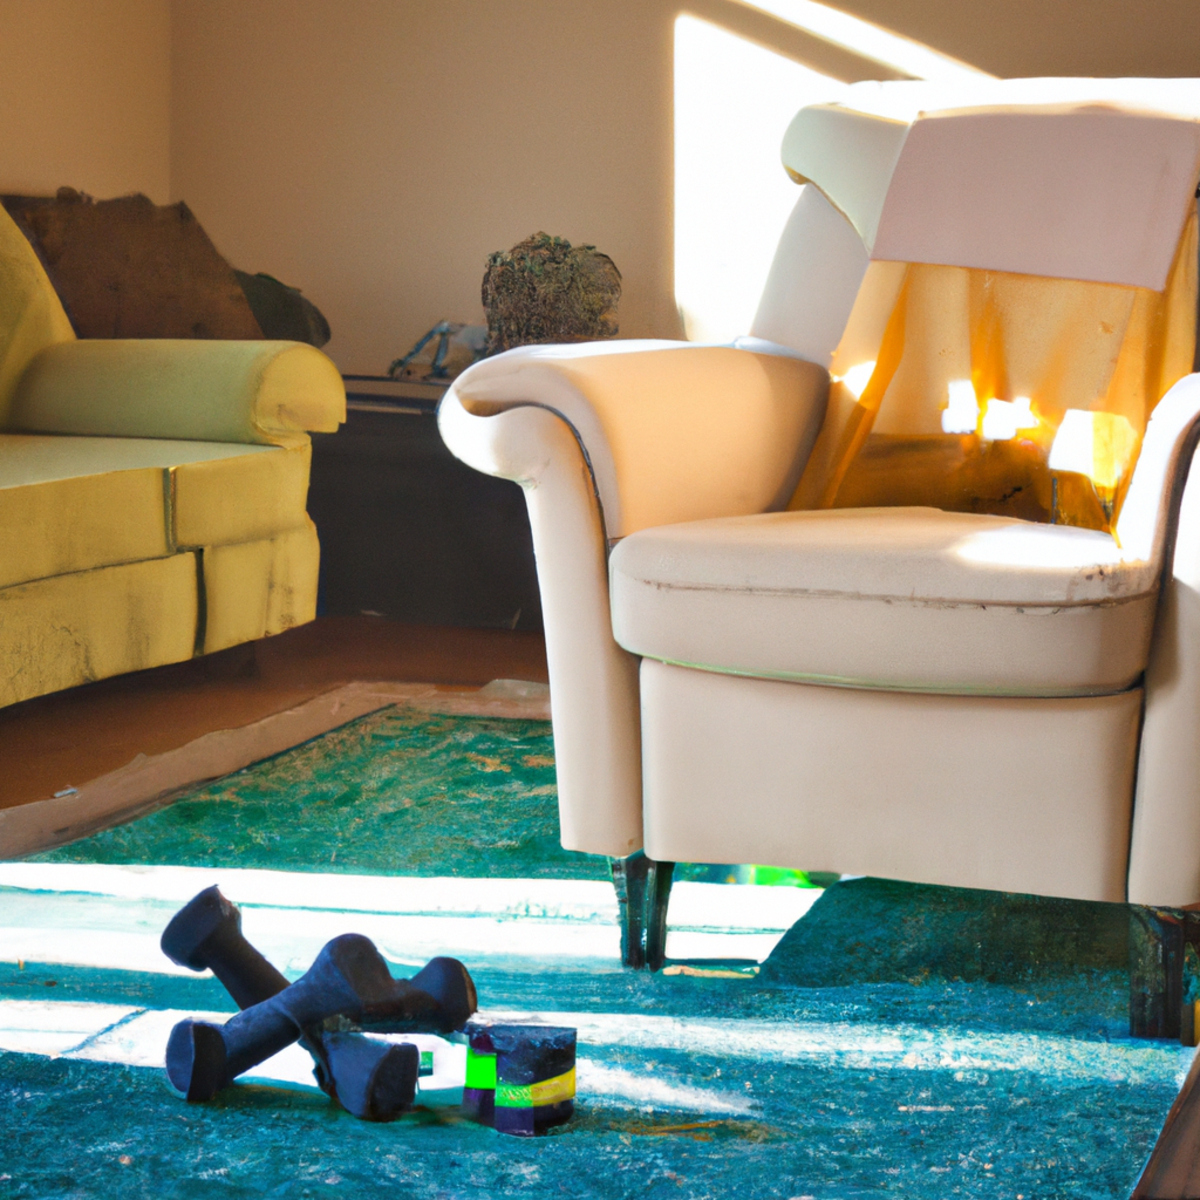 The photo captures a serene scene of a living room with a plush carpet and a comfortable armchair. In the foreground, there is a yoga mat with a foam block and a strap, indicating the focus on senior exercises and fitness. On the mat, there are also a pair of light dumbbells and a resistance band, suggesting the incorporation of strength training into the exercise routine. In the background, there is a large window with natural light streaming in, creating a peaceful ambiance. The overall composition of the photo exudes a sense of calm and relaxation, inviting seniors to engage in gentle yet effective exercises to maintain their physical well-being.